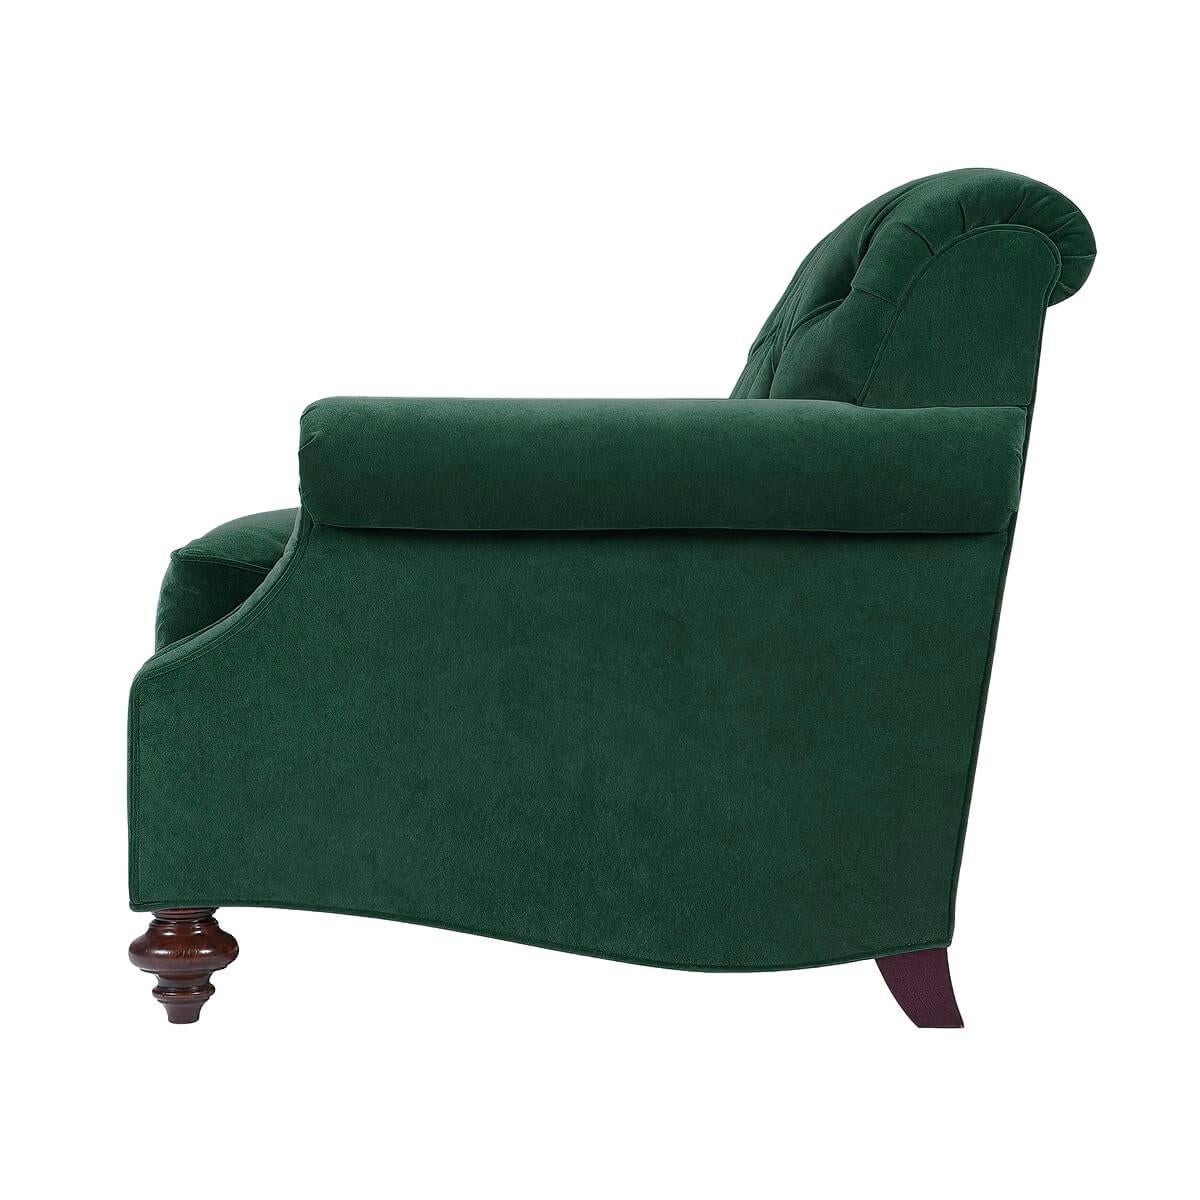 An upholstered chair, the tufted back and loose cushion seat between traditional roll arms, on mahogany stained turned legs. The solid maple frame with 8-way hand-tied upholstery.

Dimensions: 37